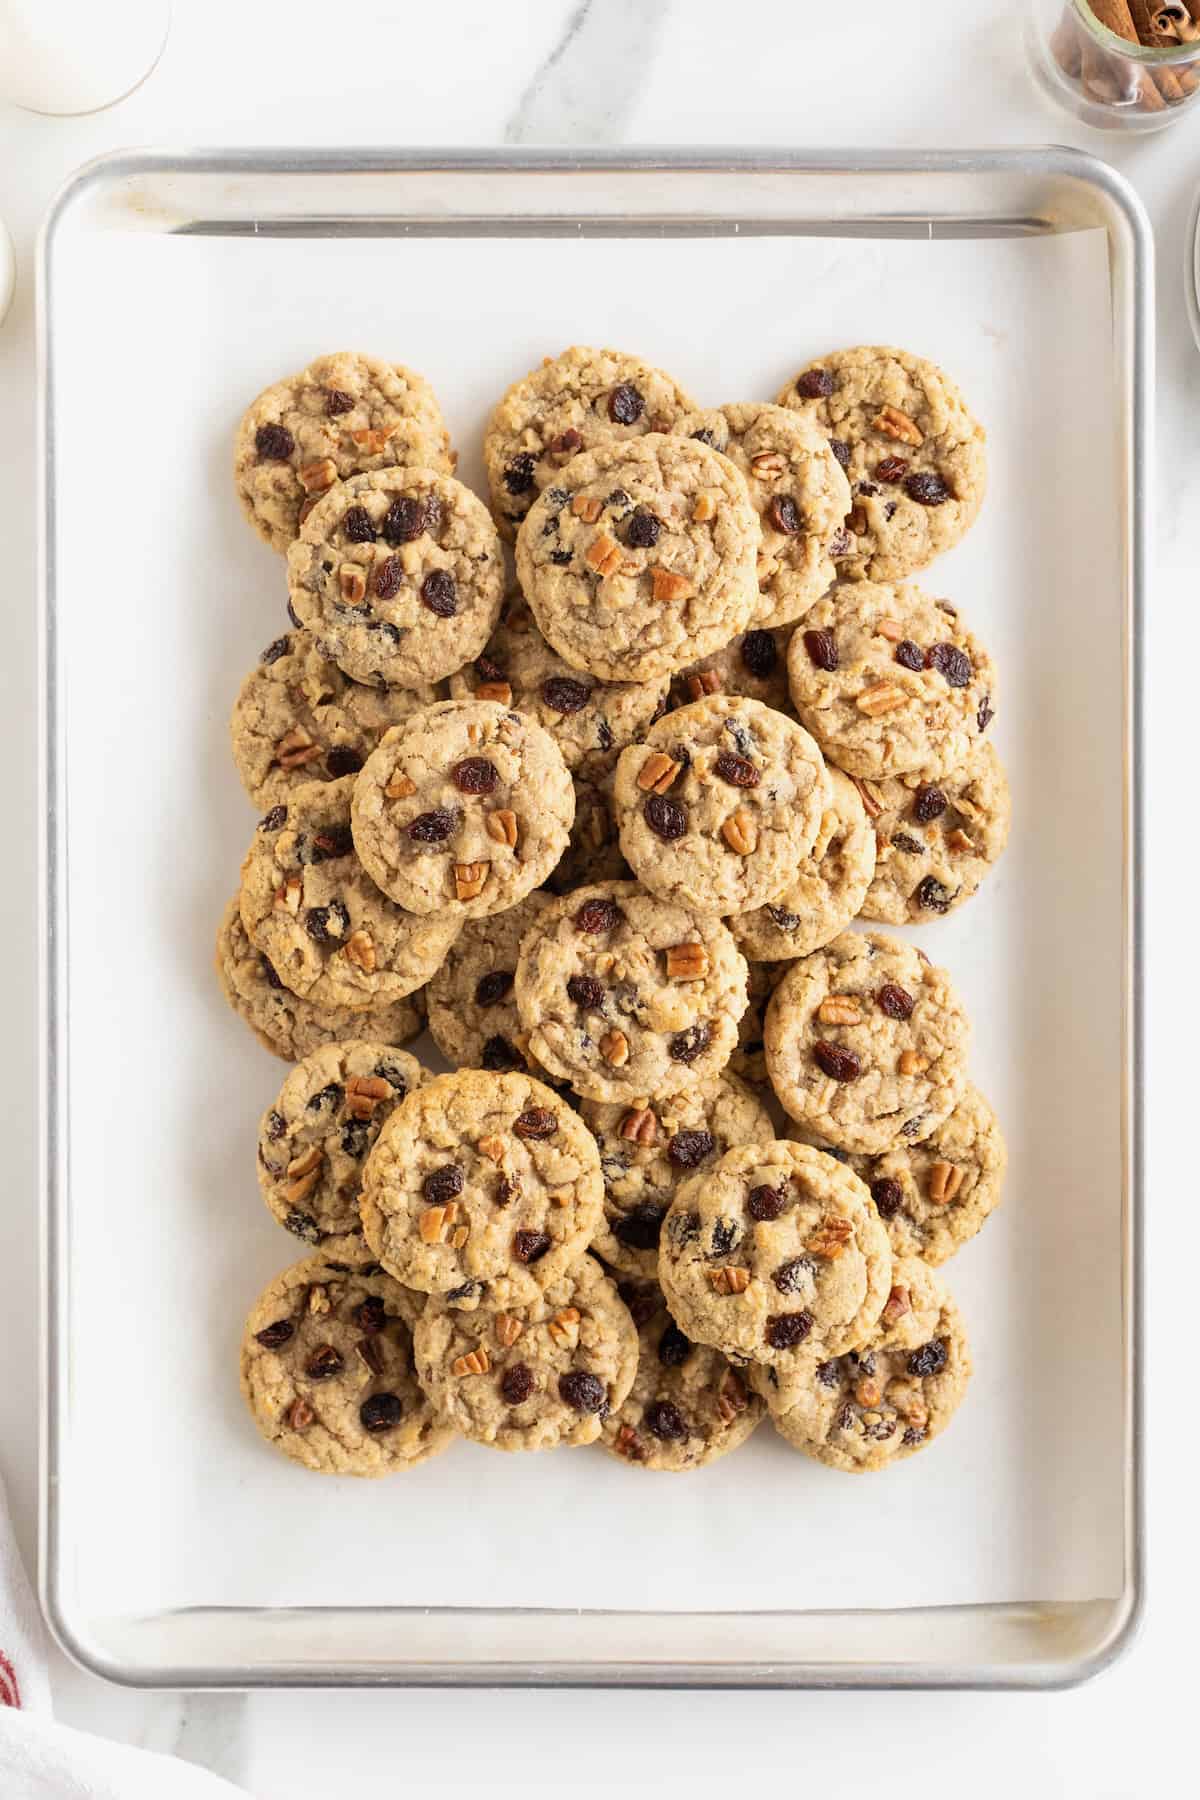 A parchment lined aluminum baking sheet piled high with oatmeal raisin cookies with pecans.